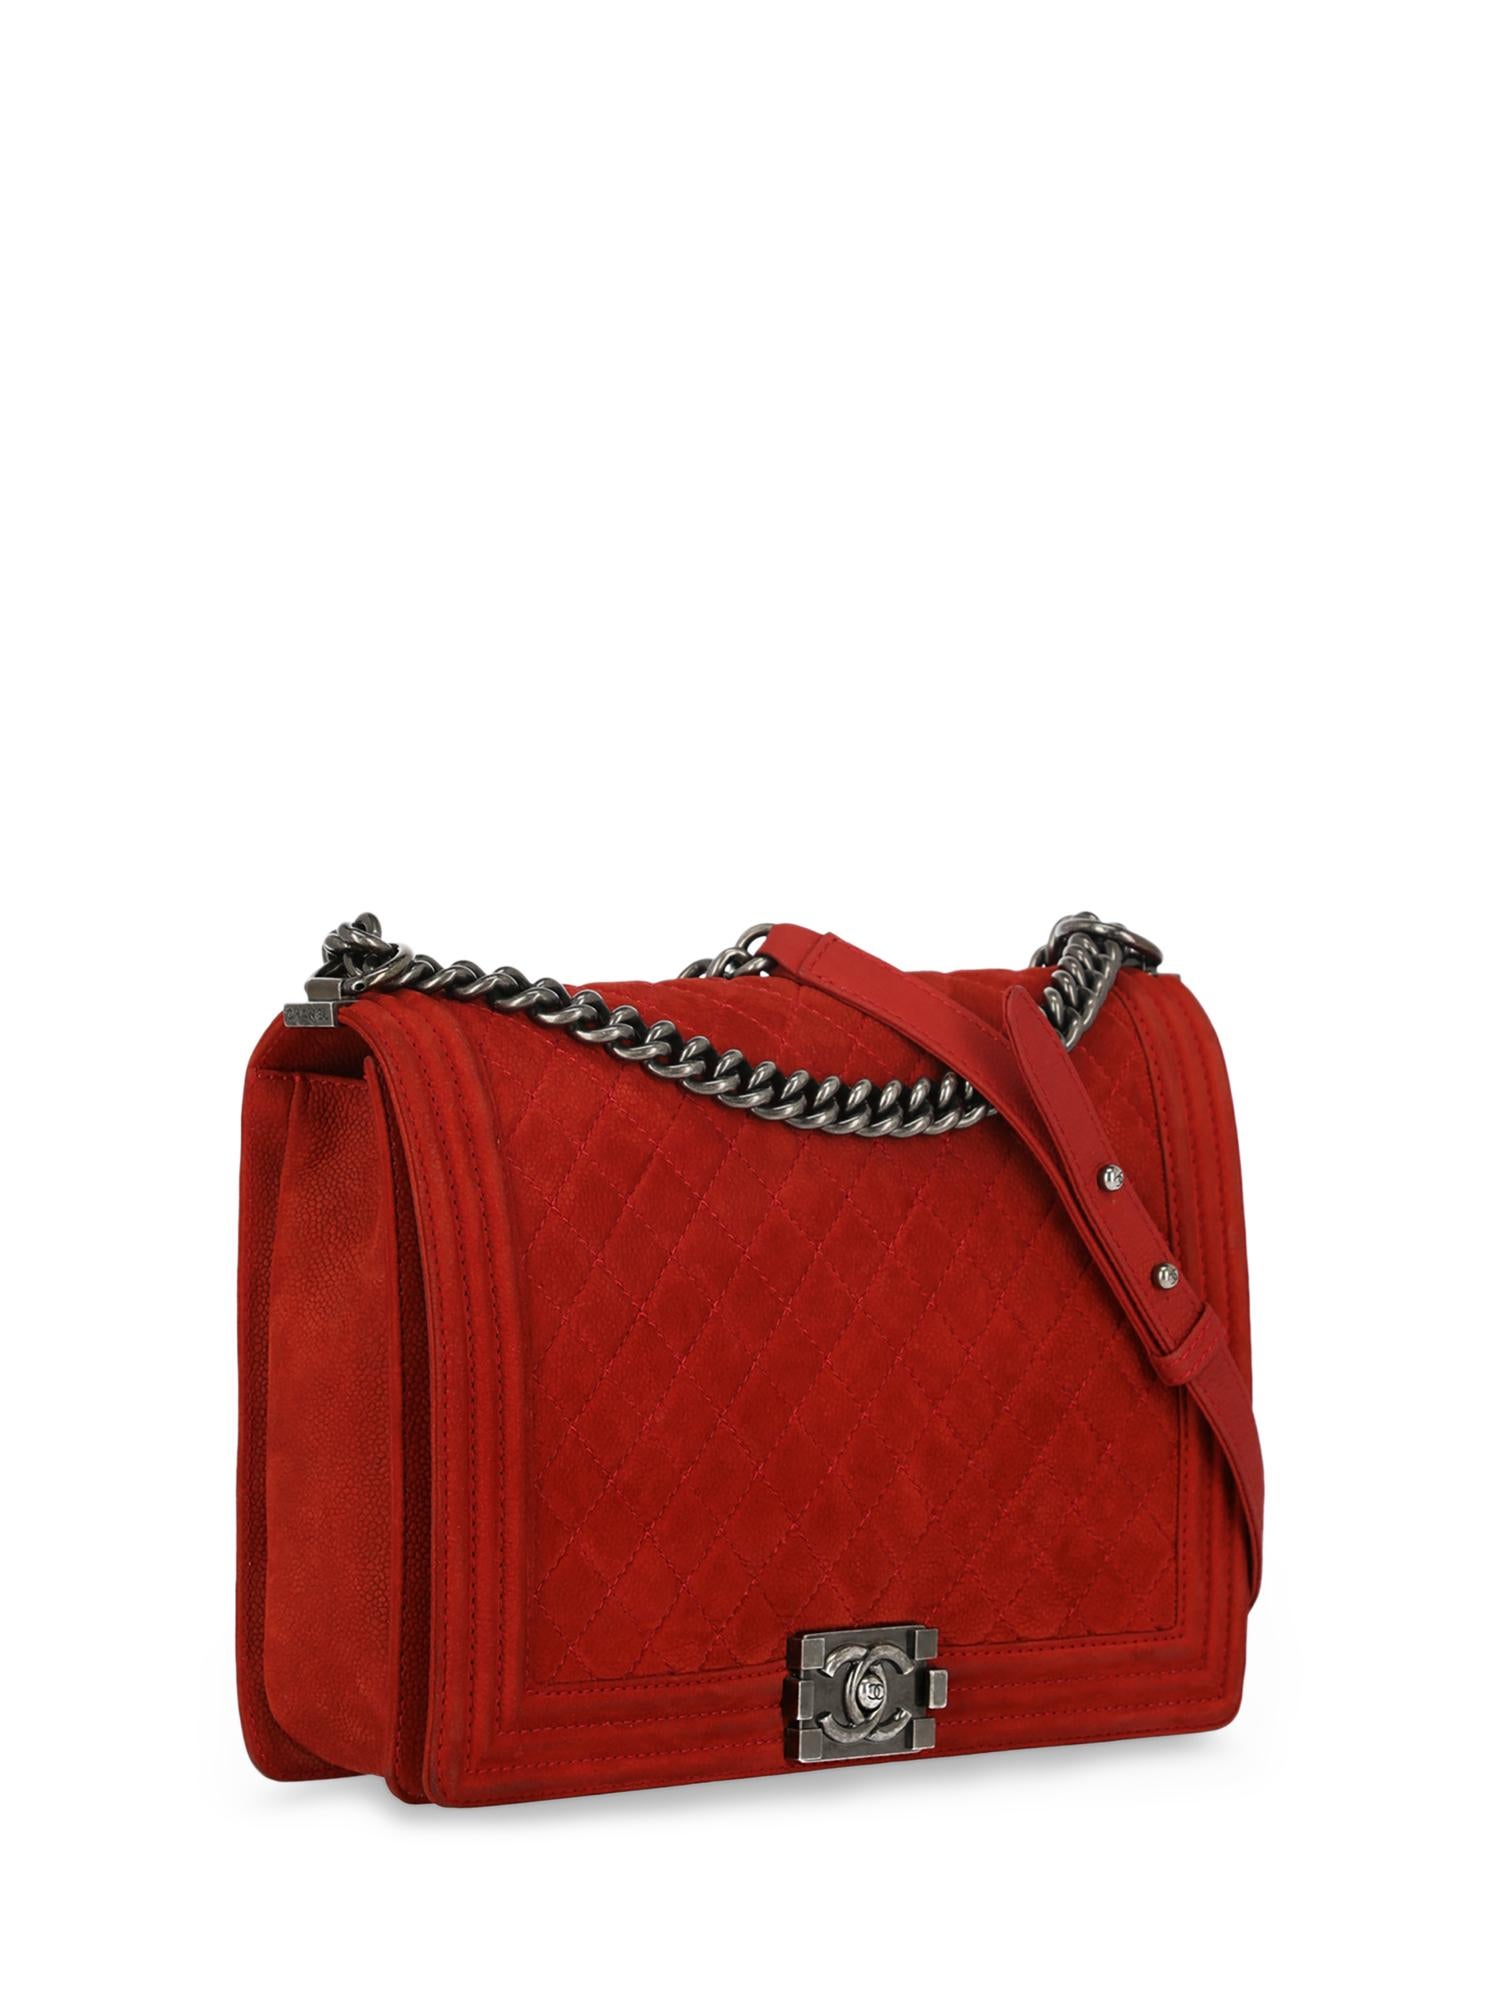 Chanel Woman Boy Red  In Fair Condition For Sale In Milan, IT